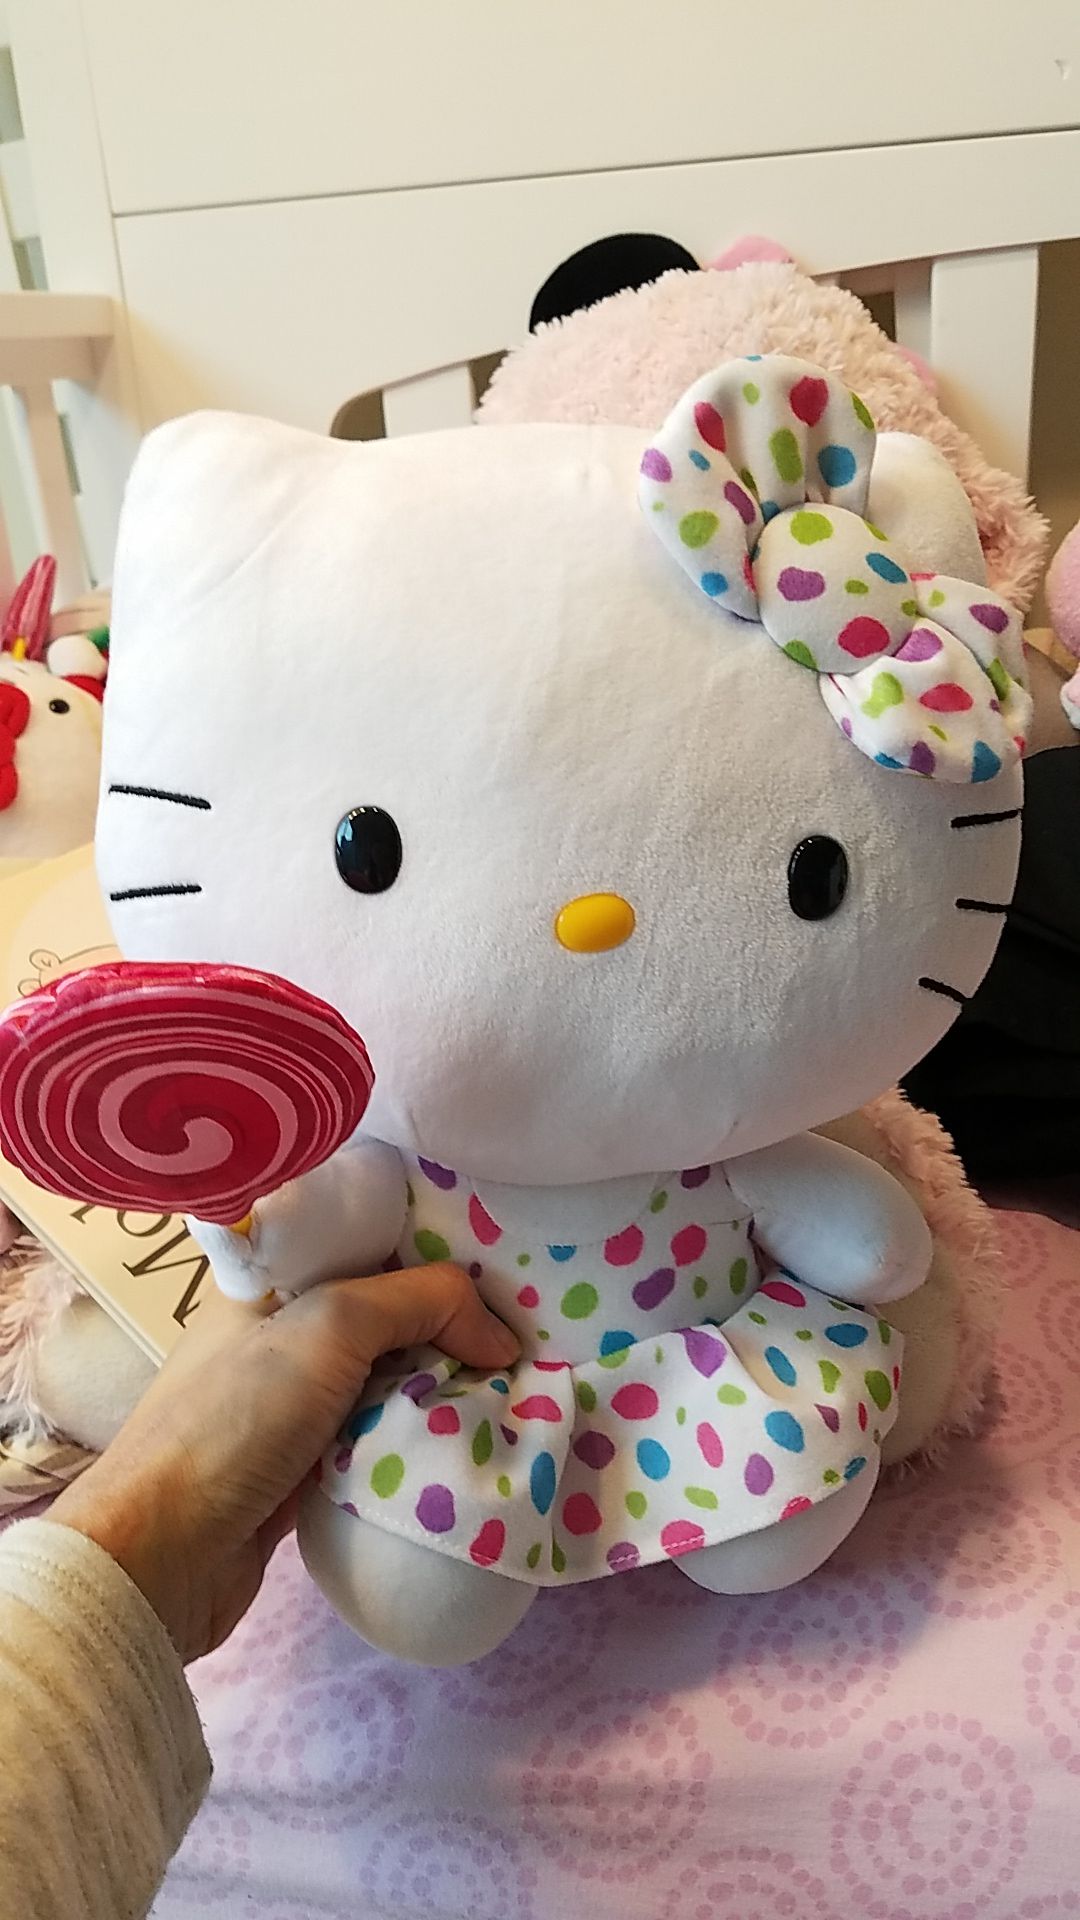 Large hello kitty plush with lollipop